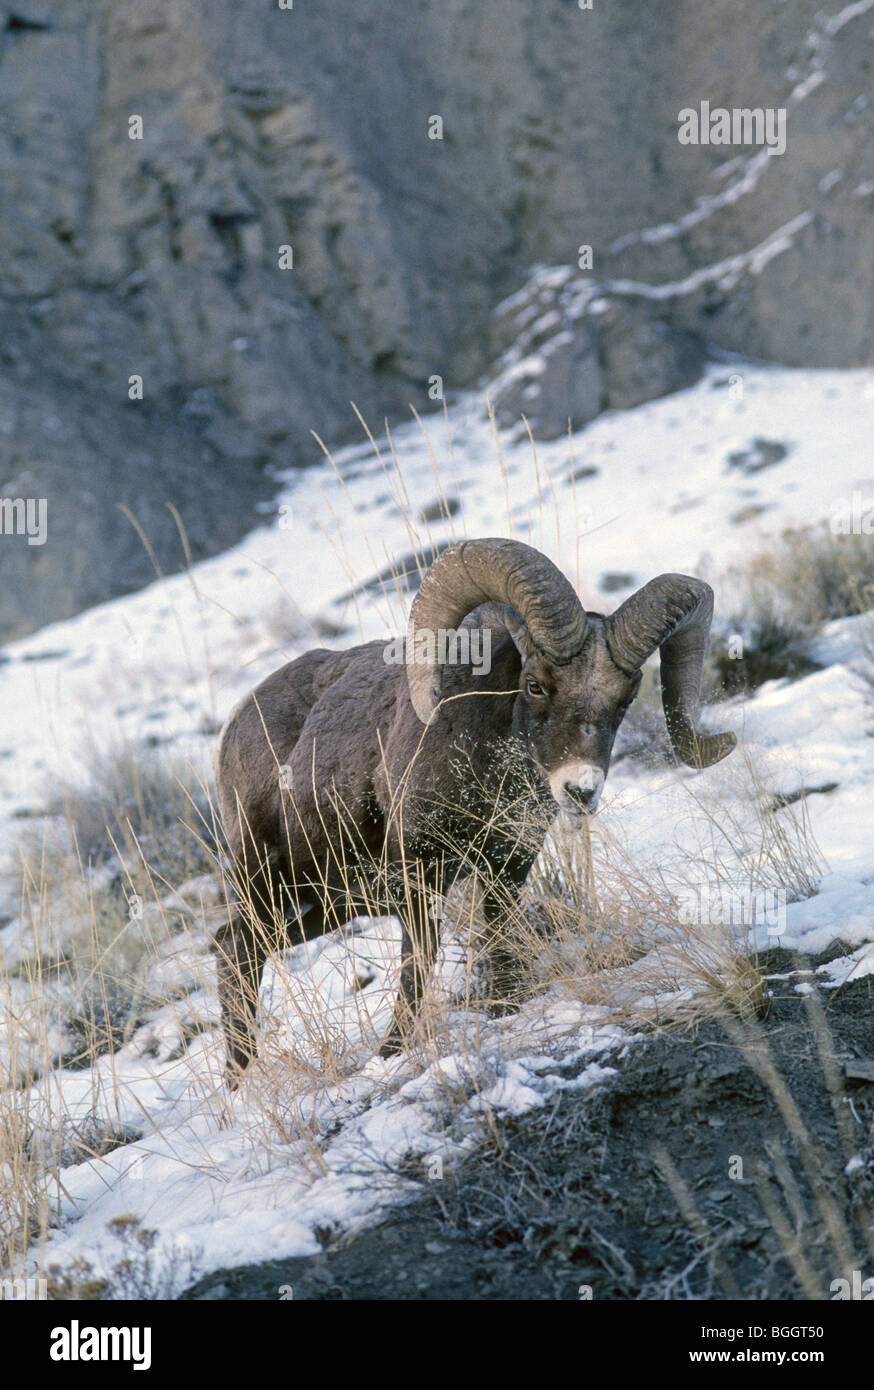 A Rocky Mountain bighorn sheep ram or male feeding on a snow covered slope in Yellowstone National Park, Wyoming Stock Photo